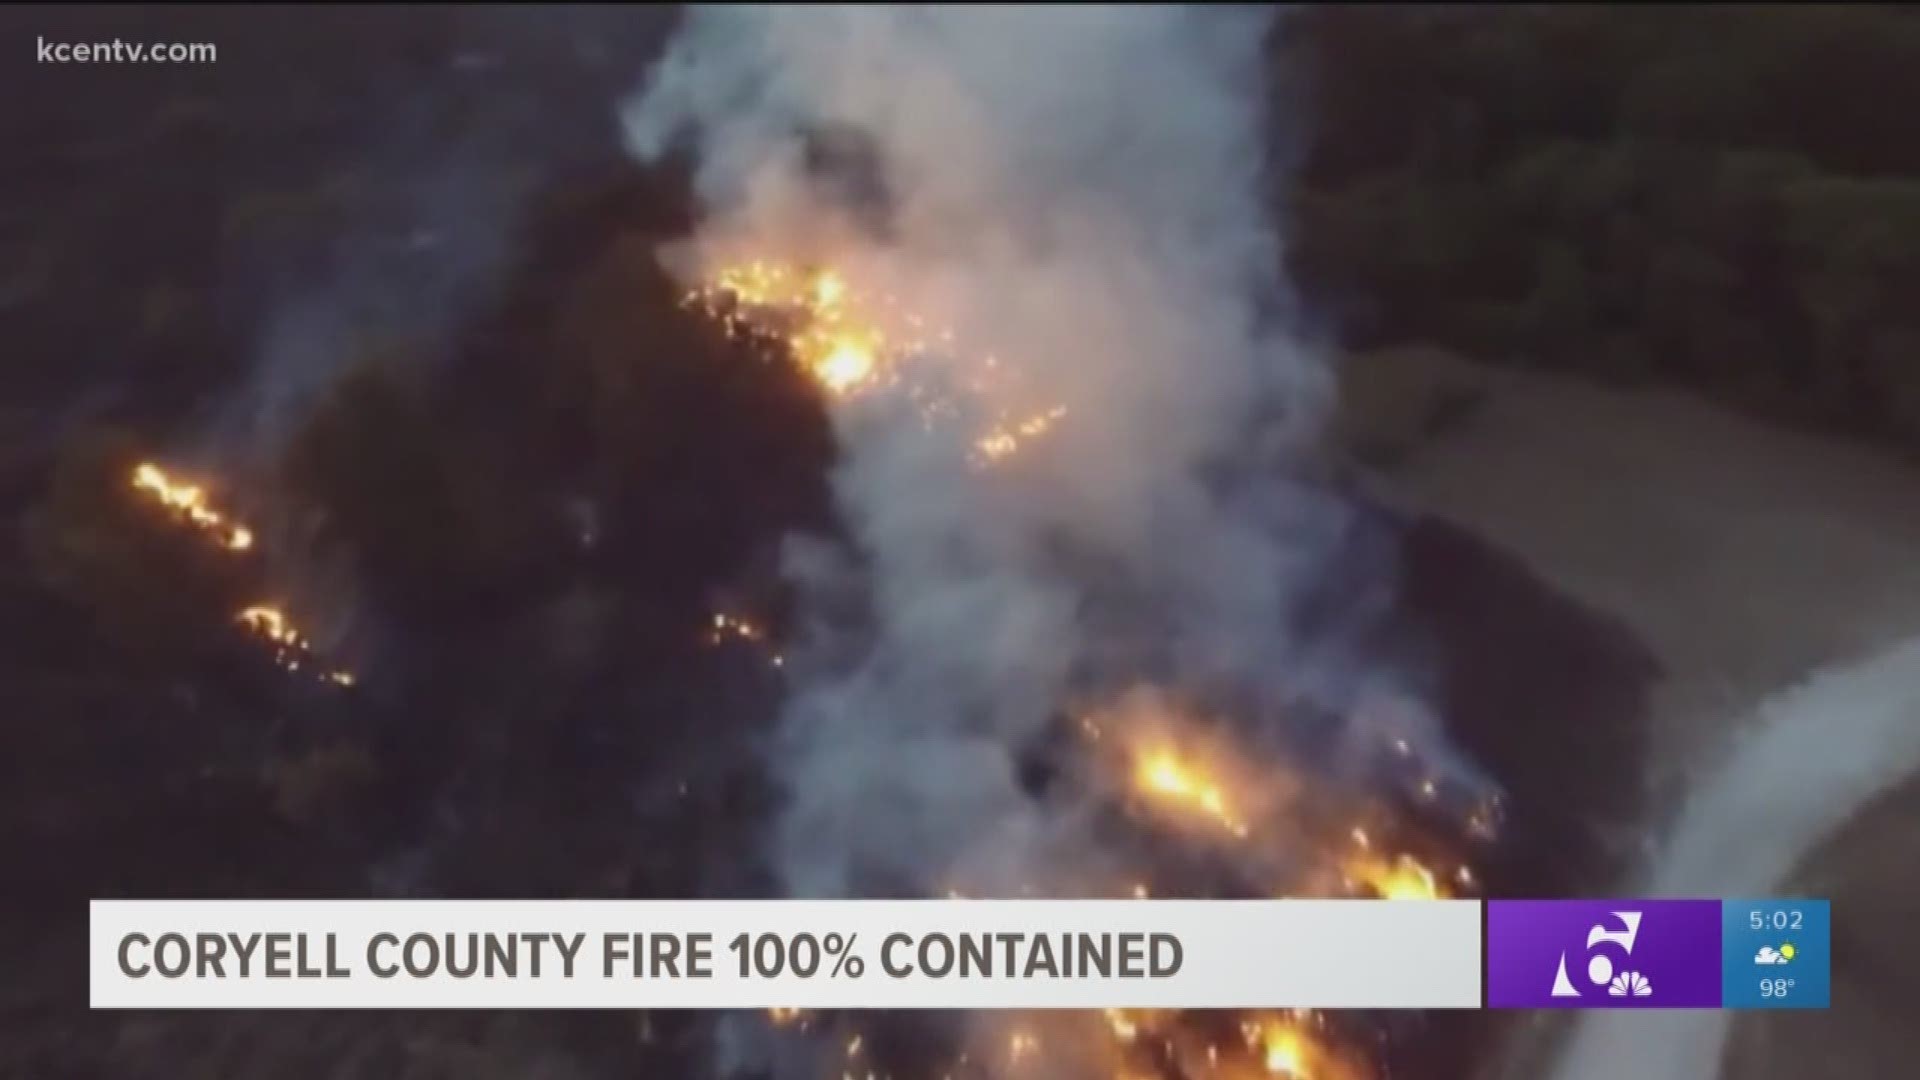 The fire burned nearly 3,000 acres.